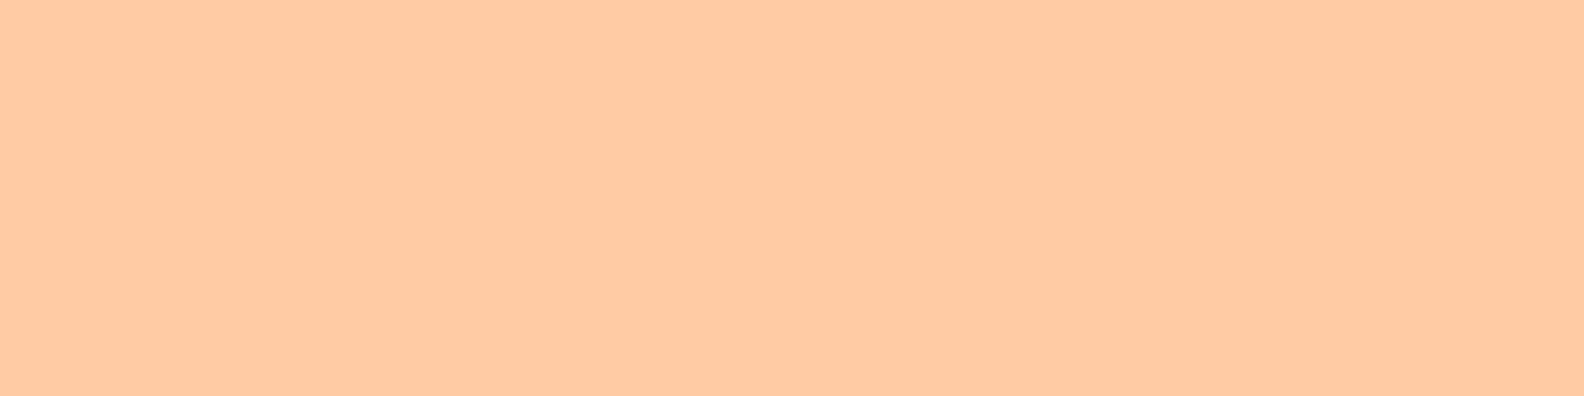 1584x396 Deep Peach Solid Color Background